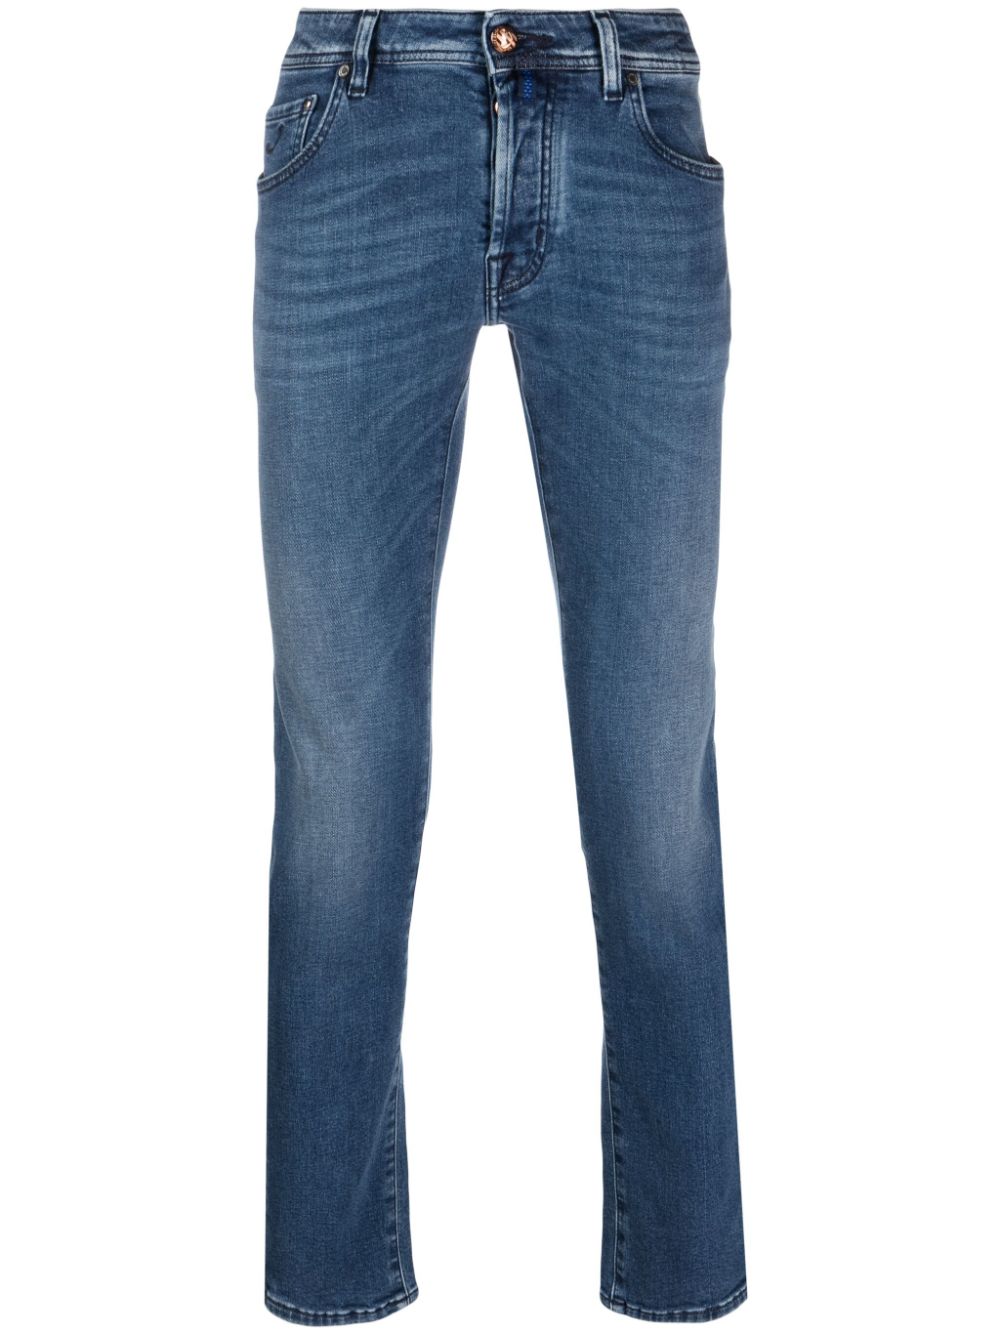 JACOB COHEN LOW-RISE SLIM-FIT TAPERED JEANS